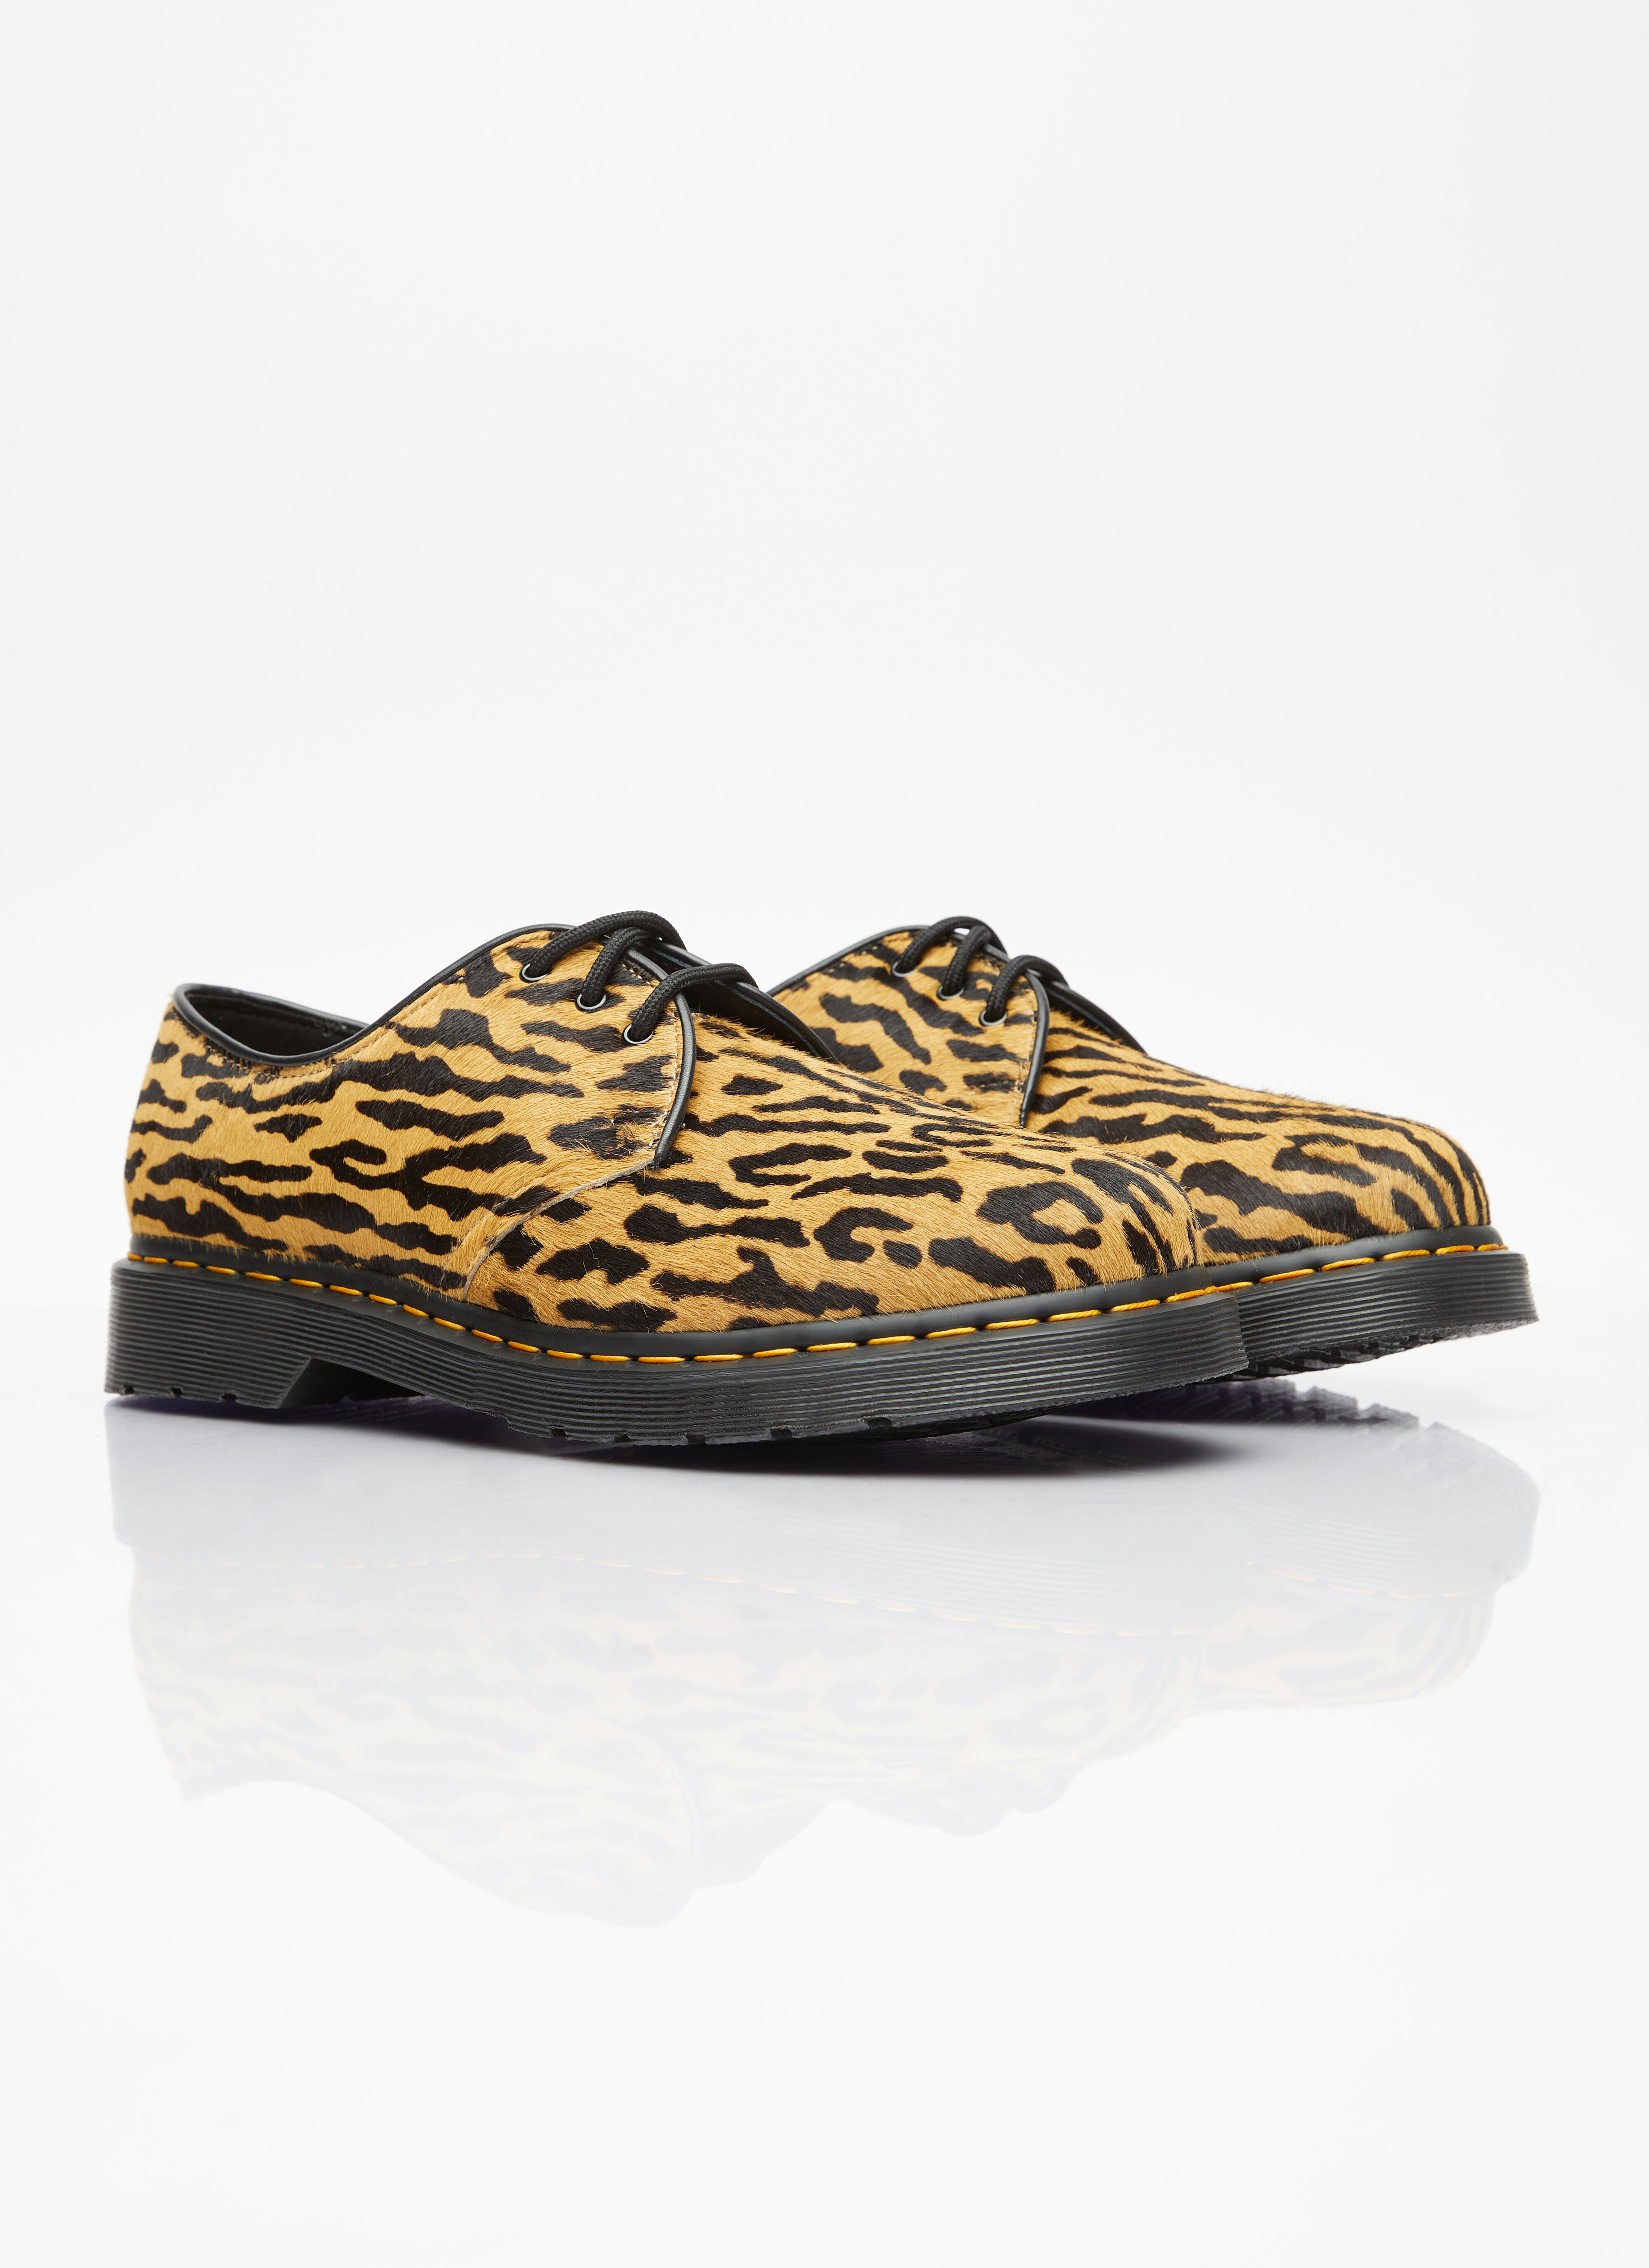 Dr. Martens x WACKO MARIA Tiger Camo Lace-Up Shoes in Beige | LN-CC®